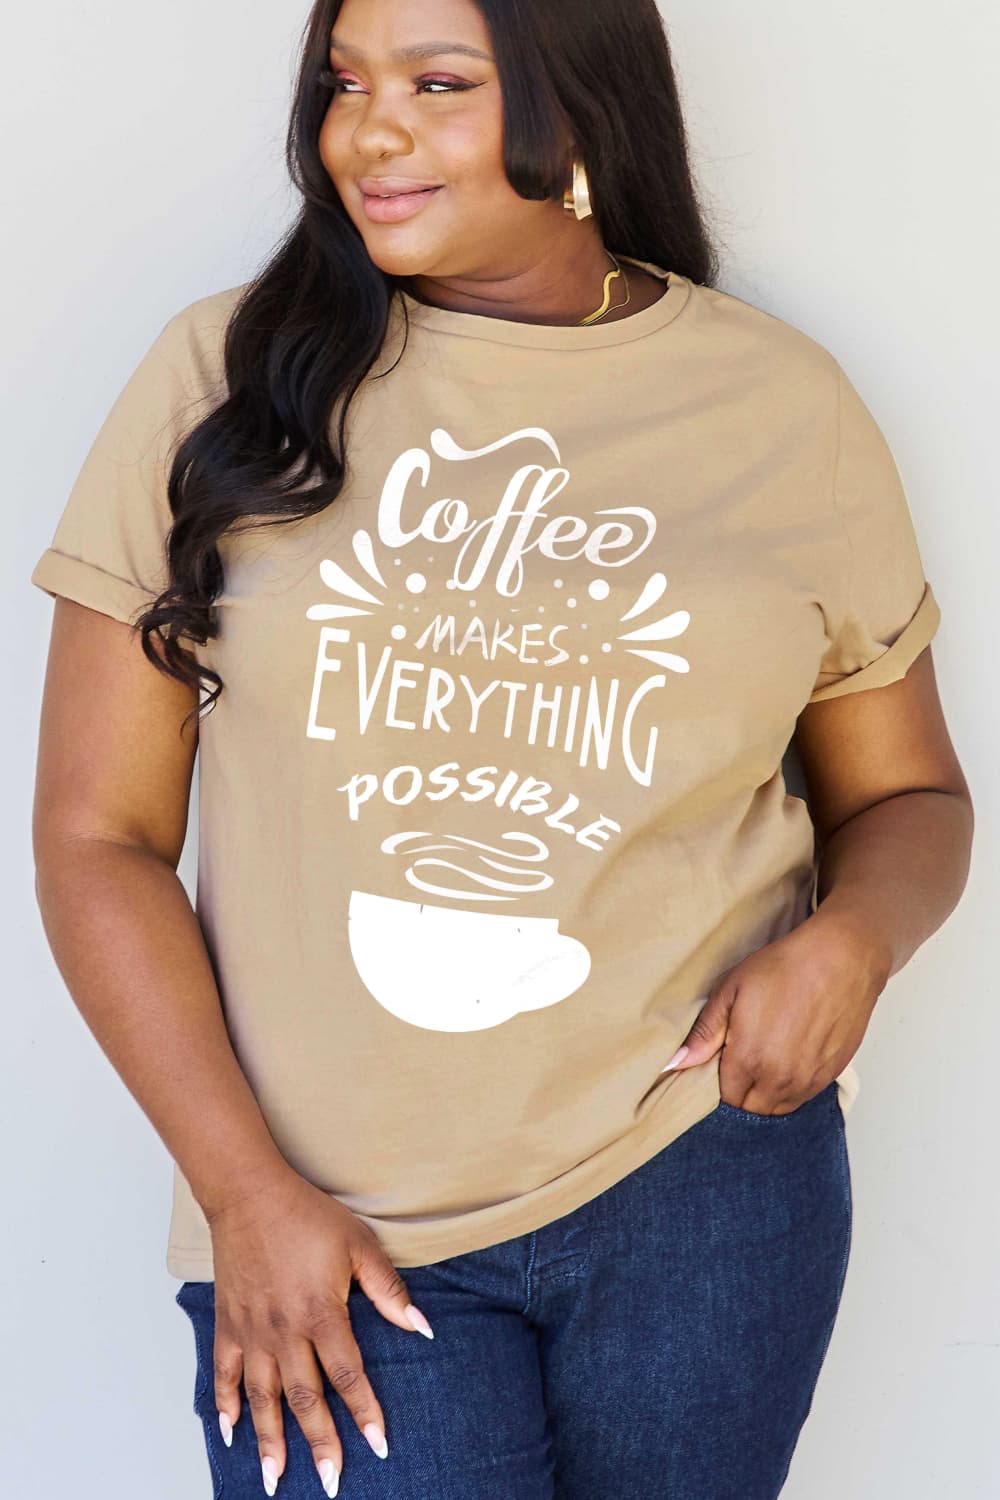 Simply Love Full Size COFFEE MAKES EVERYTHING POSSIBLE Graphic Cotton Tee BLUE ZONE PLANET